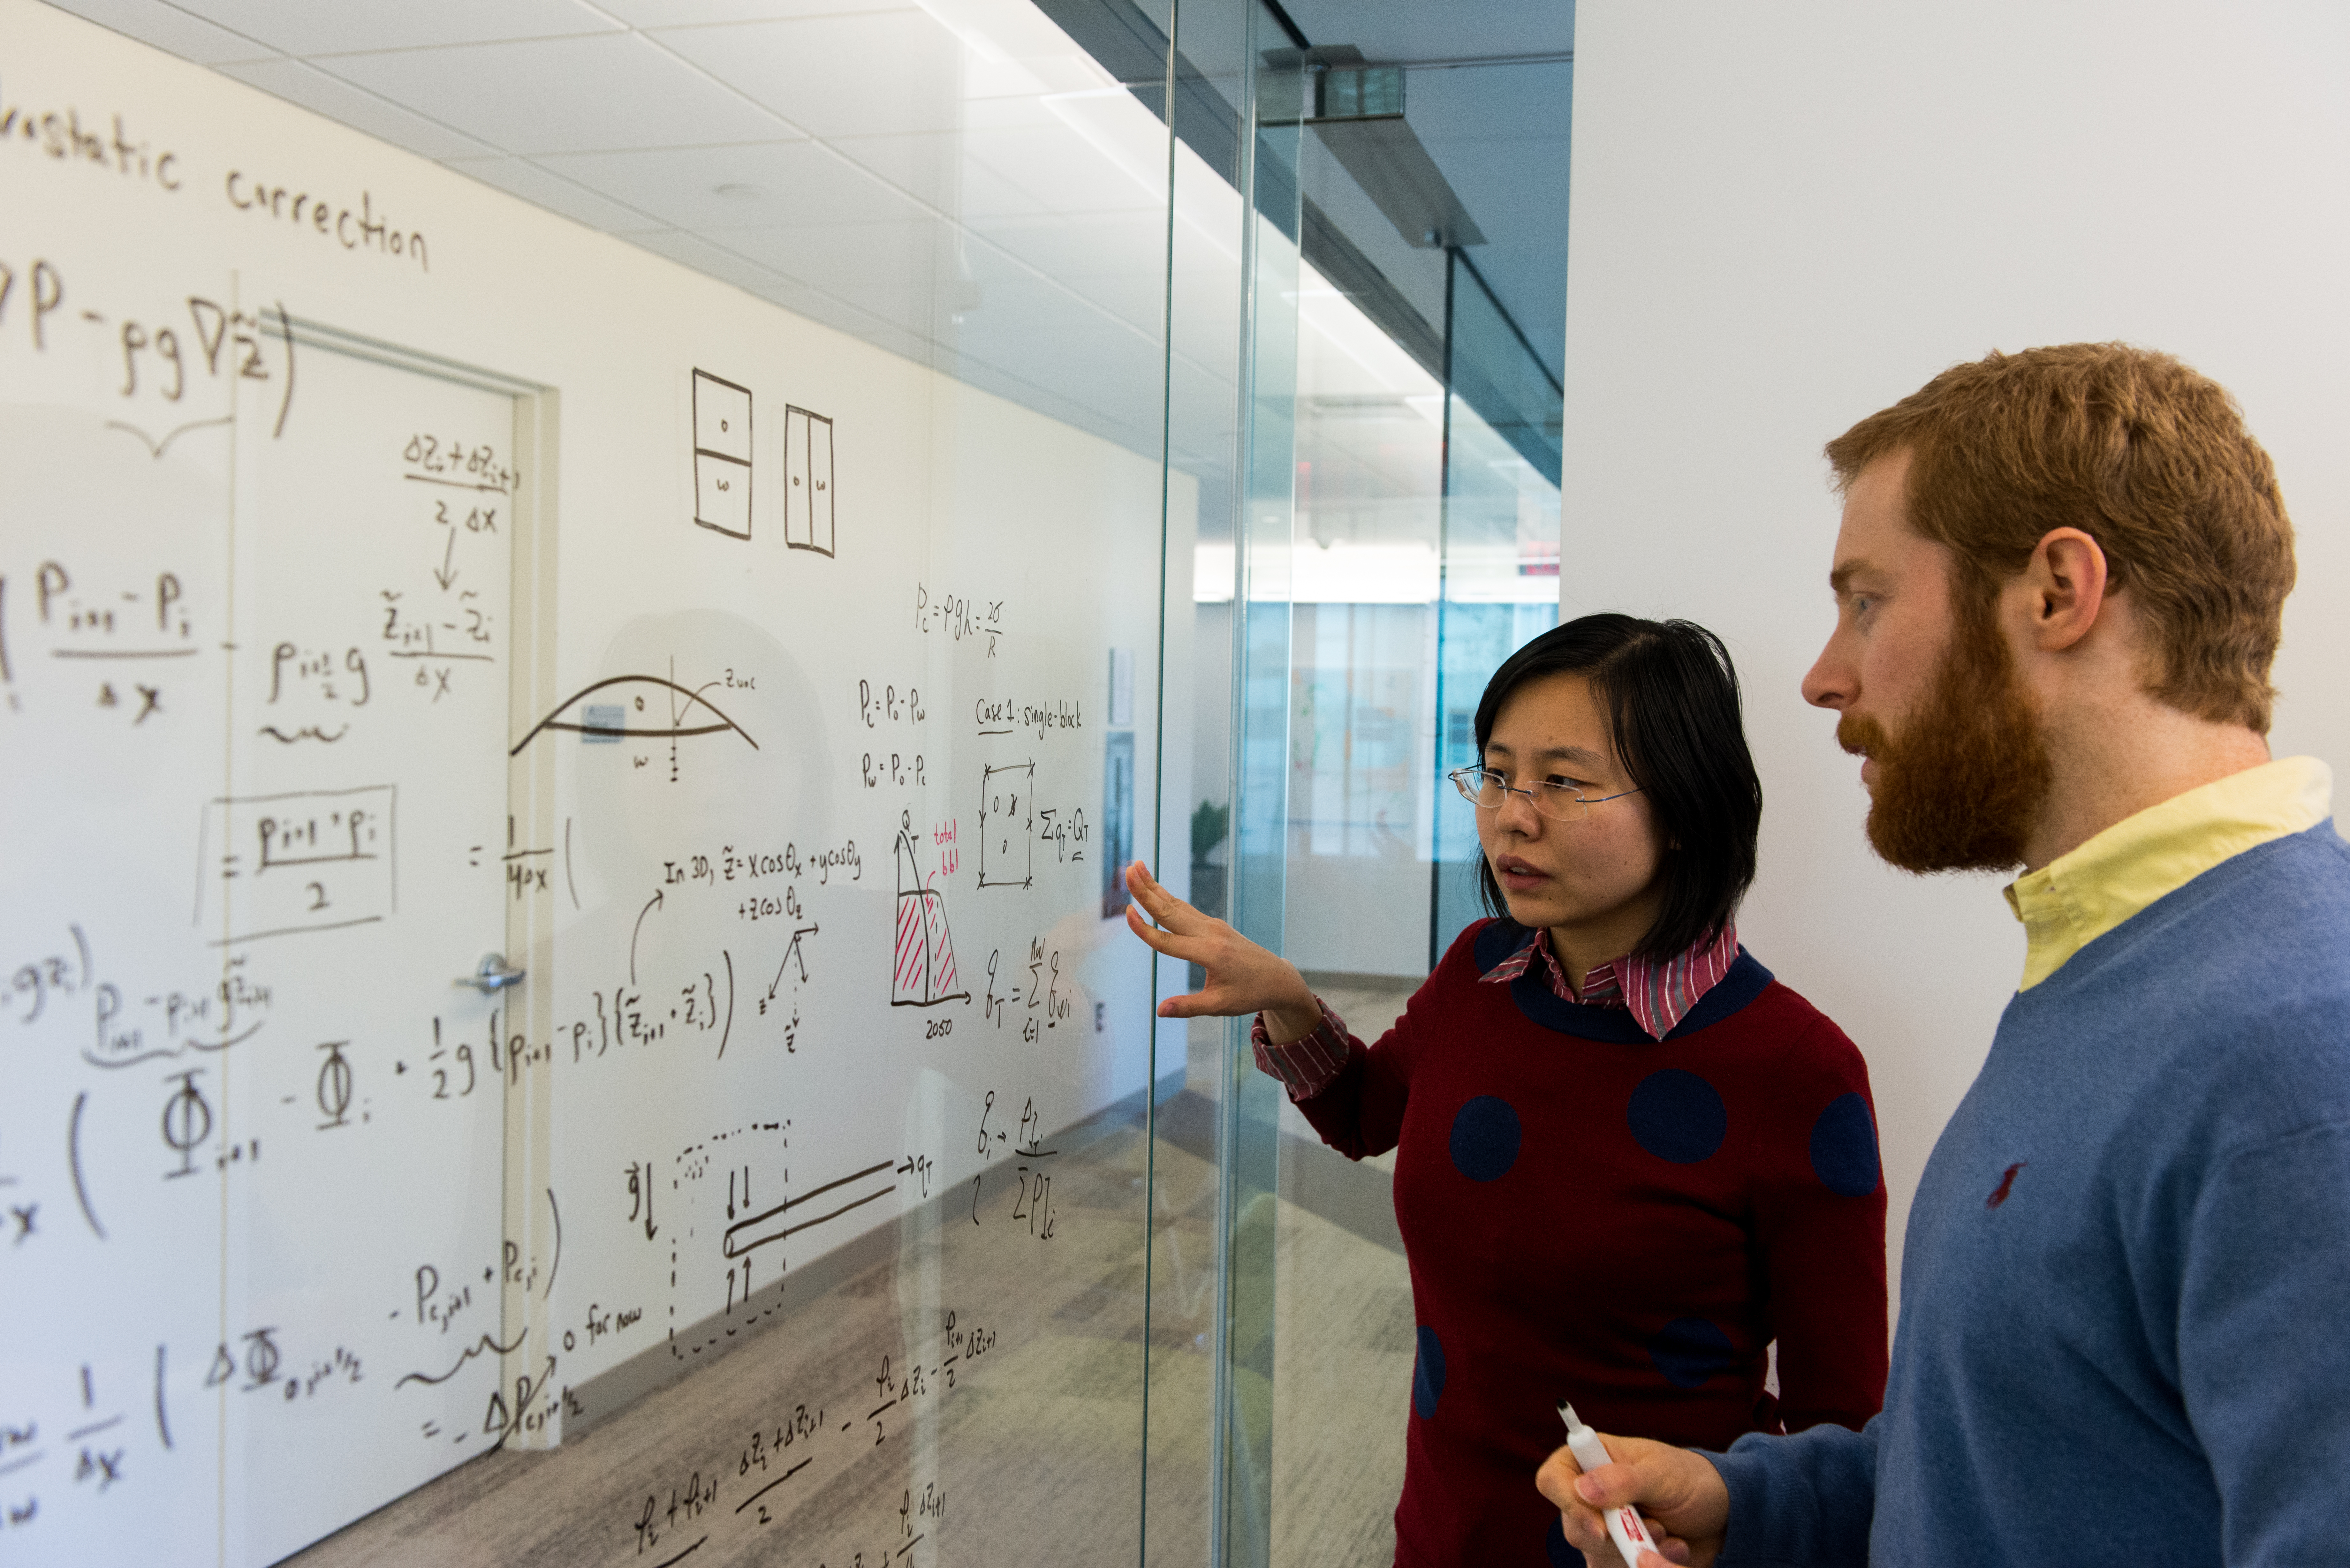 Male and female technicians view whiteboard calculations at our Boston technology research center